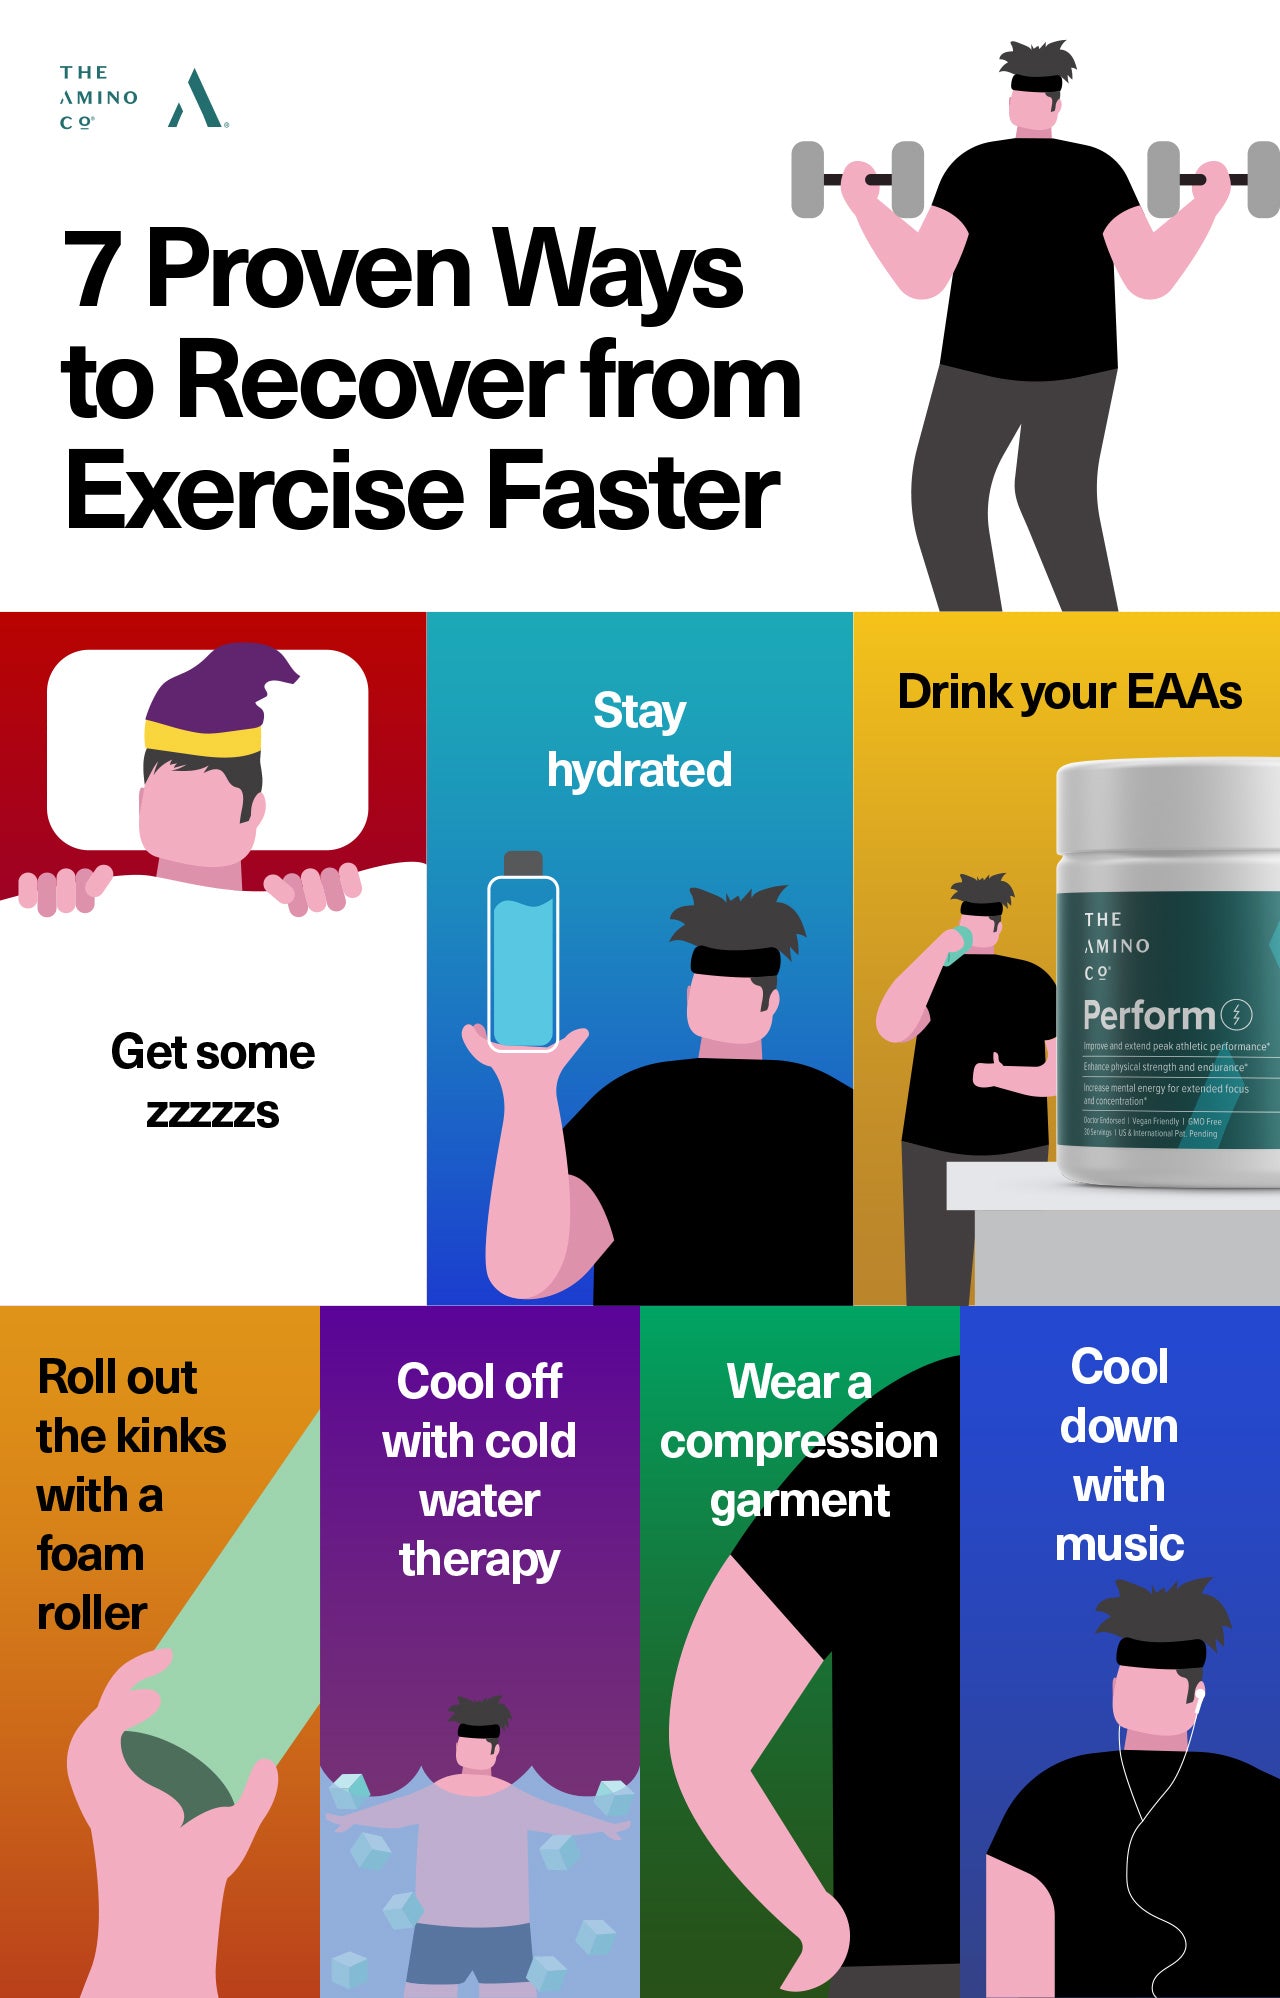 7 Proven Ways to Recover from Exercise Faster